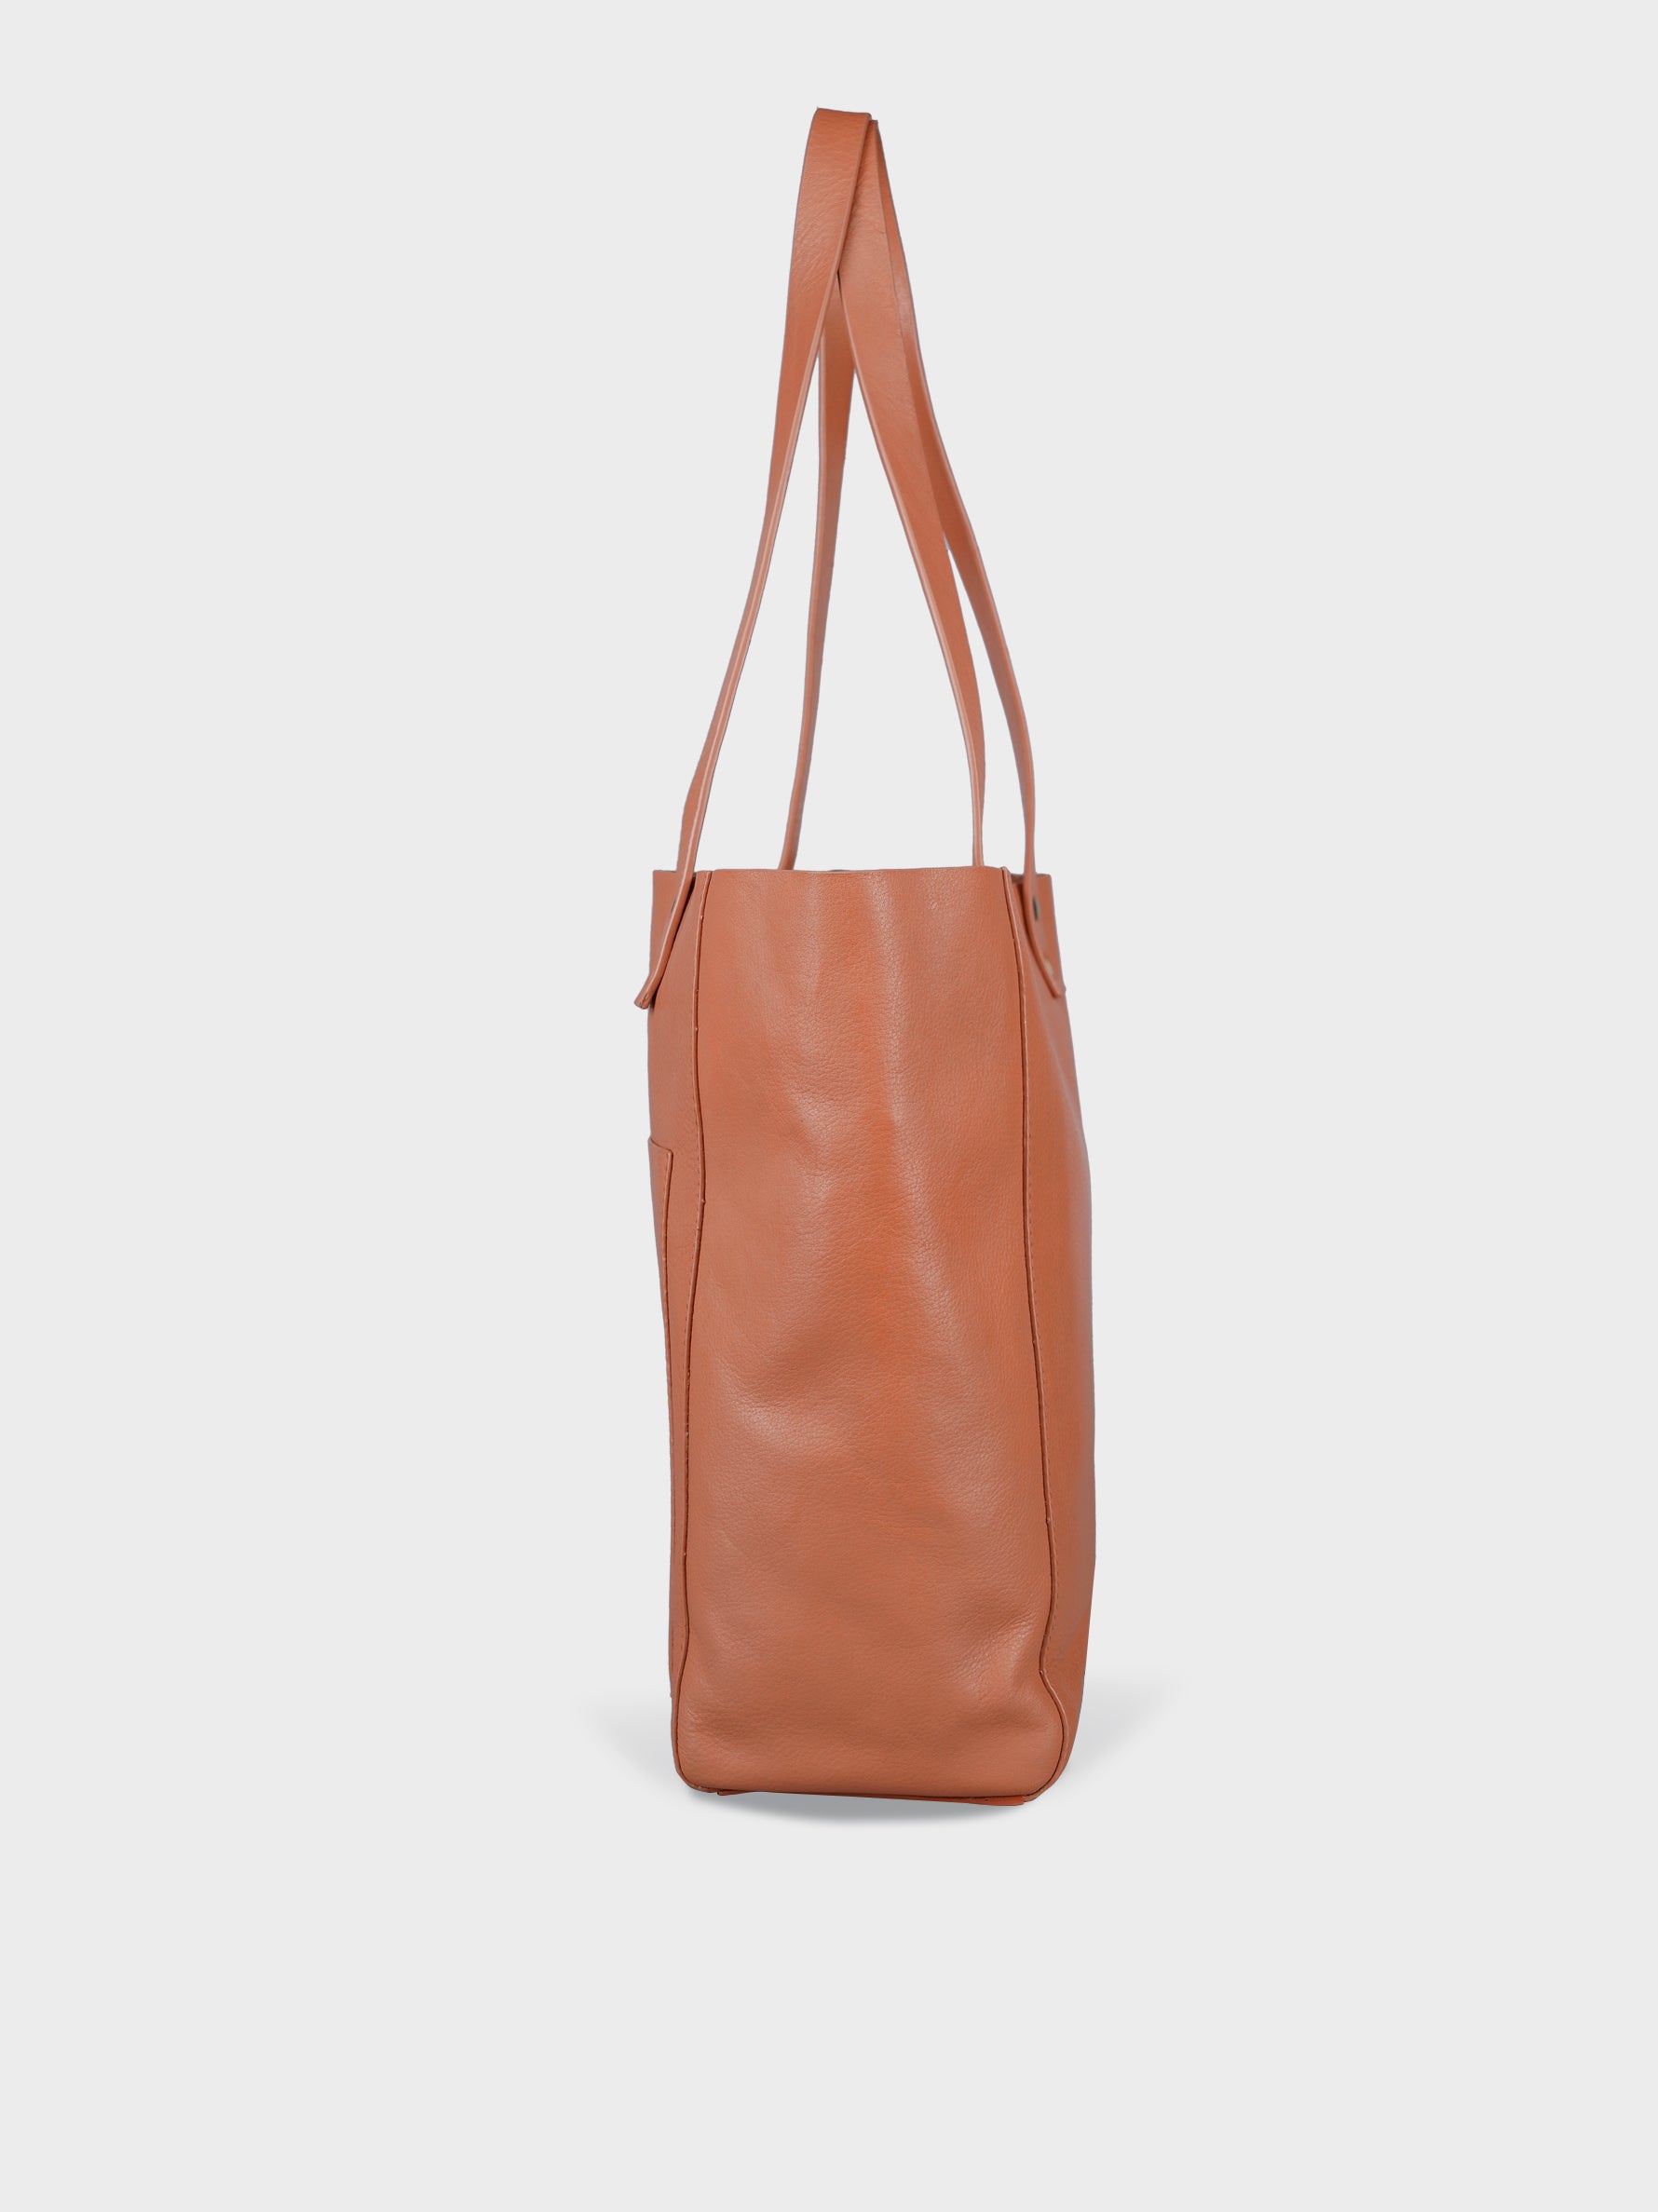 Handcrafted Genuine Vegetable Tanned Leather Old Fashioned Tote Regular Dusty Peach  for Women Tan & Loom